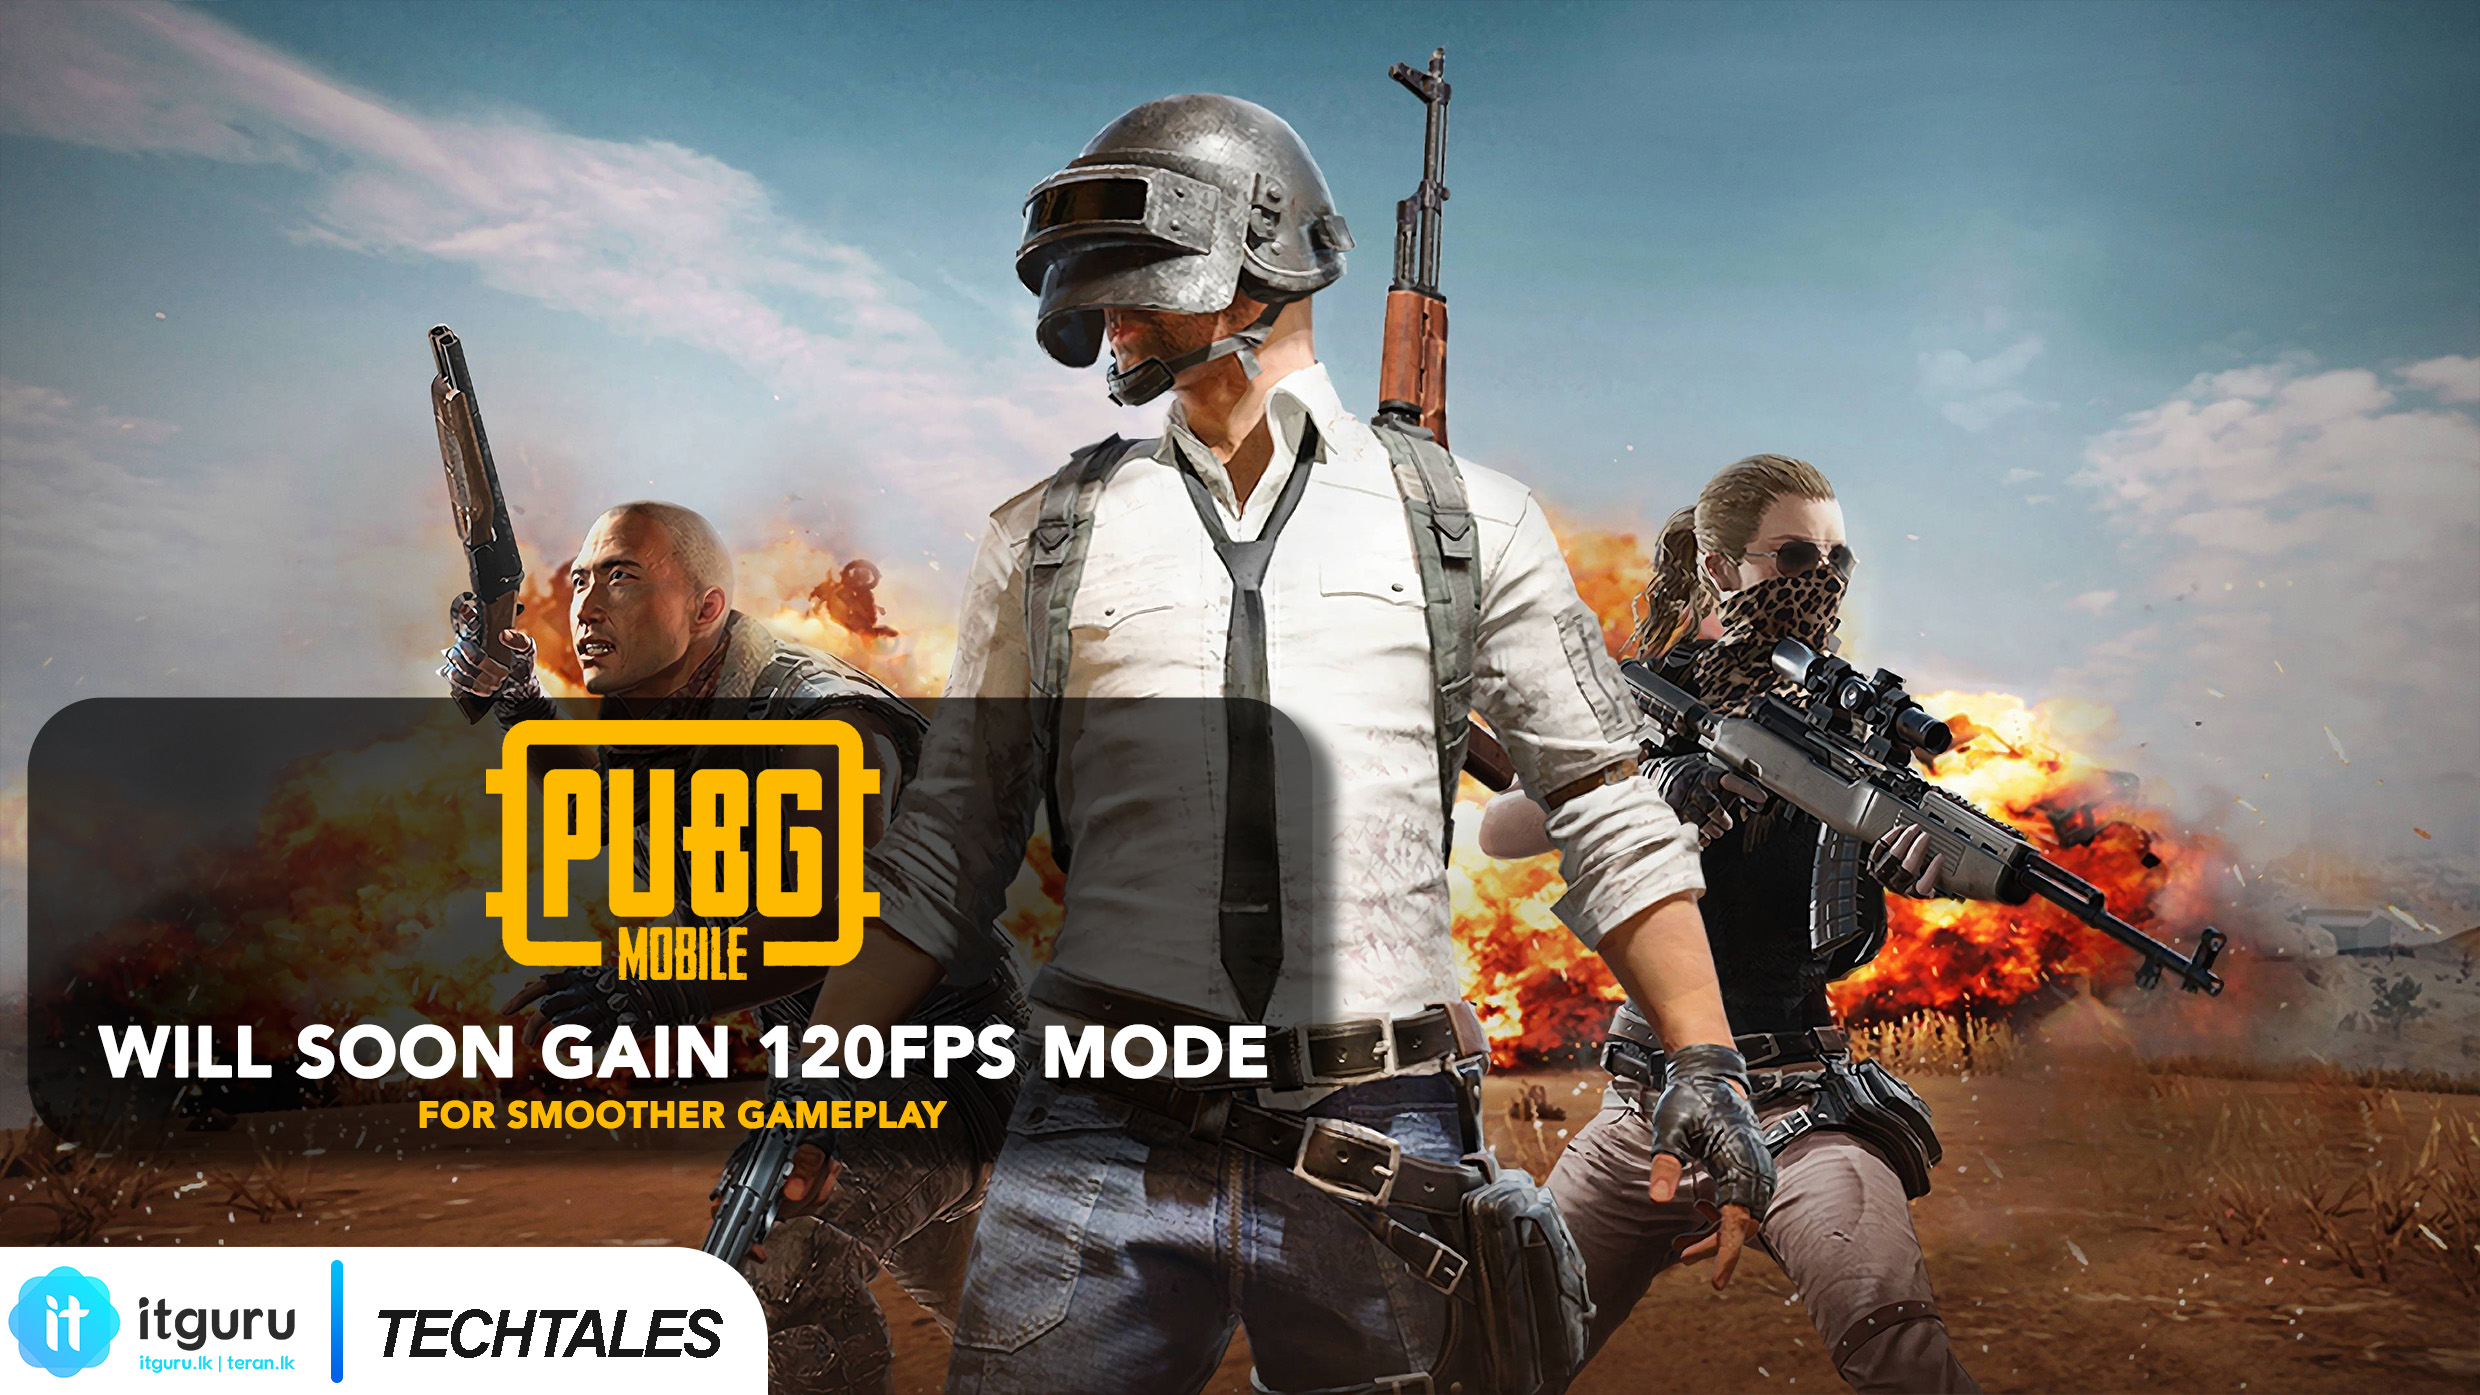 PUBG Mobile to Introduce 120fps Mode for Enhanced Gameplay Experience